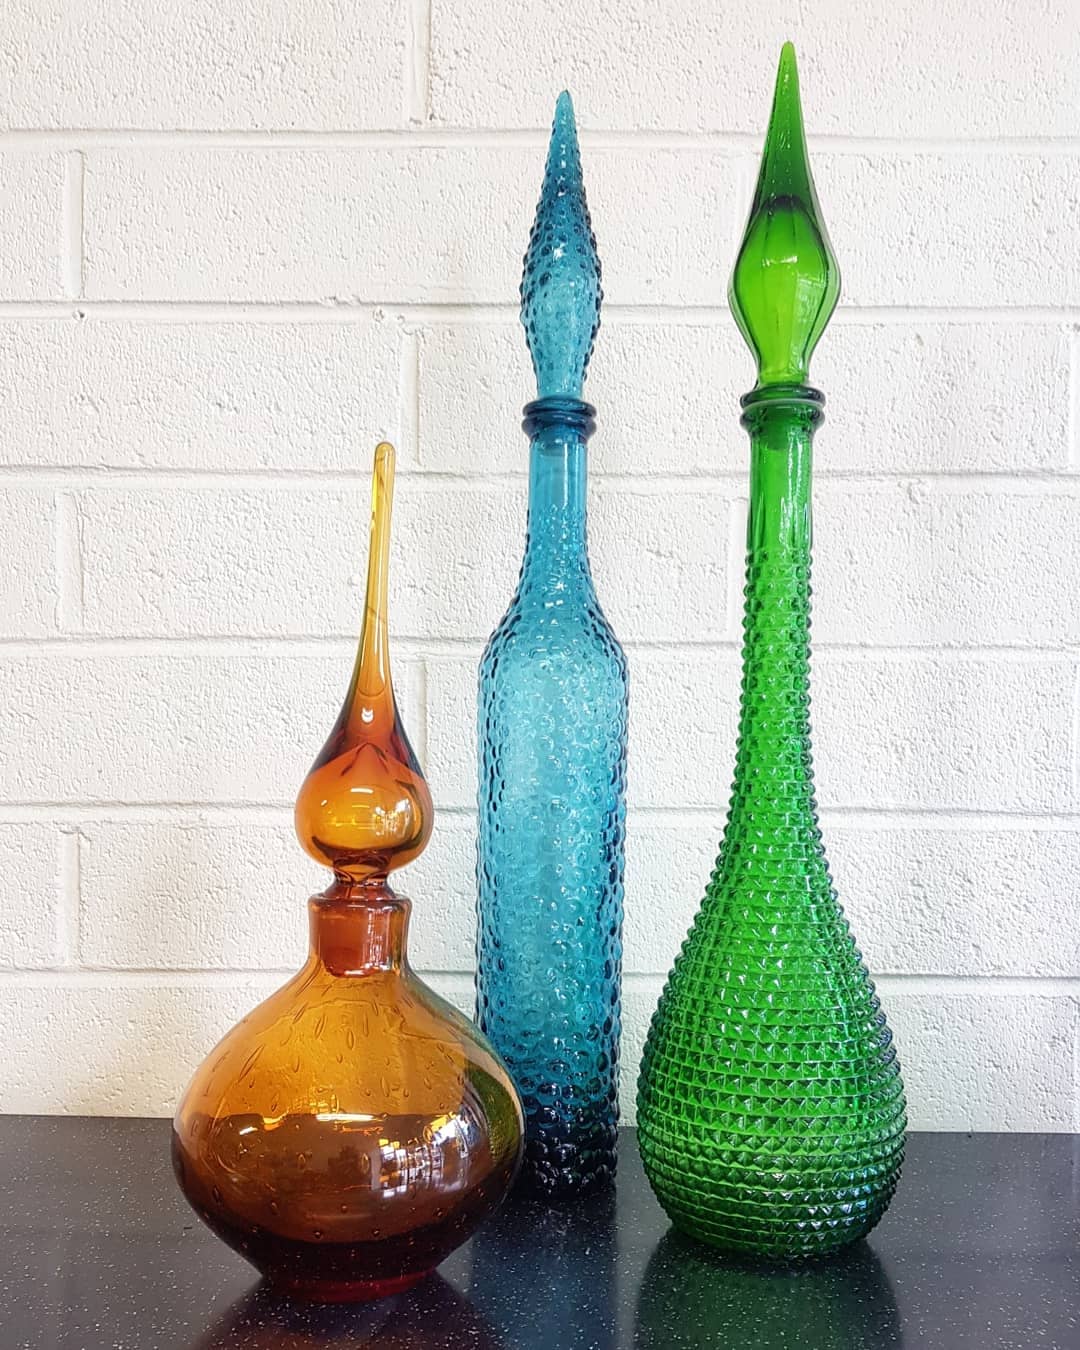 (L-R) Mid Century Amber Hand Blown Glass Genie Bottle, Italy c.1960  // Mid Century Blue Glass Bubble Genie Bottle, Italy c.1960  // Mid Century Green Glass Hobnail Genie Bottle, Italy c.1960 